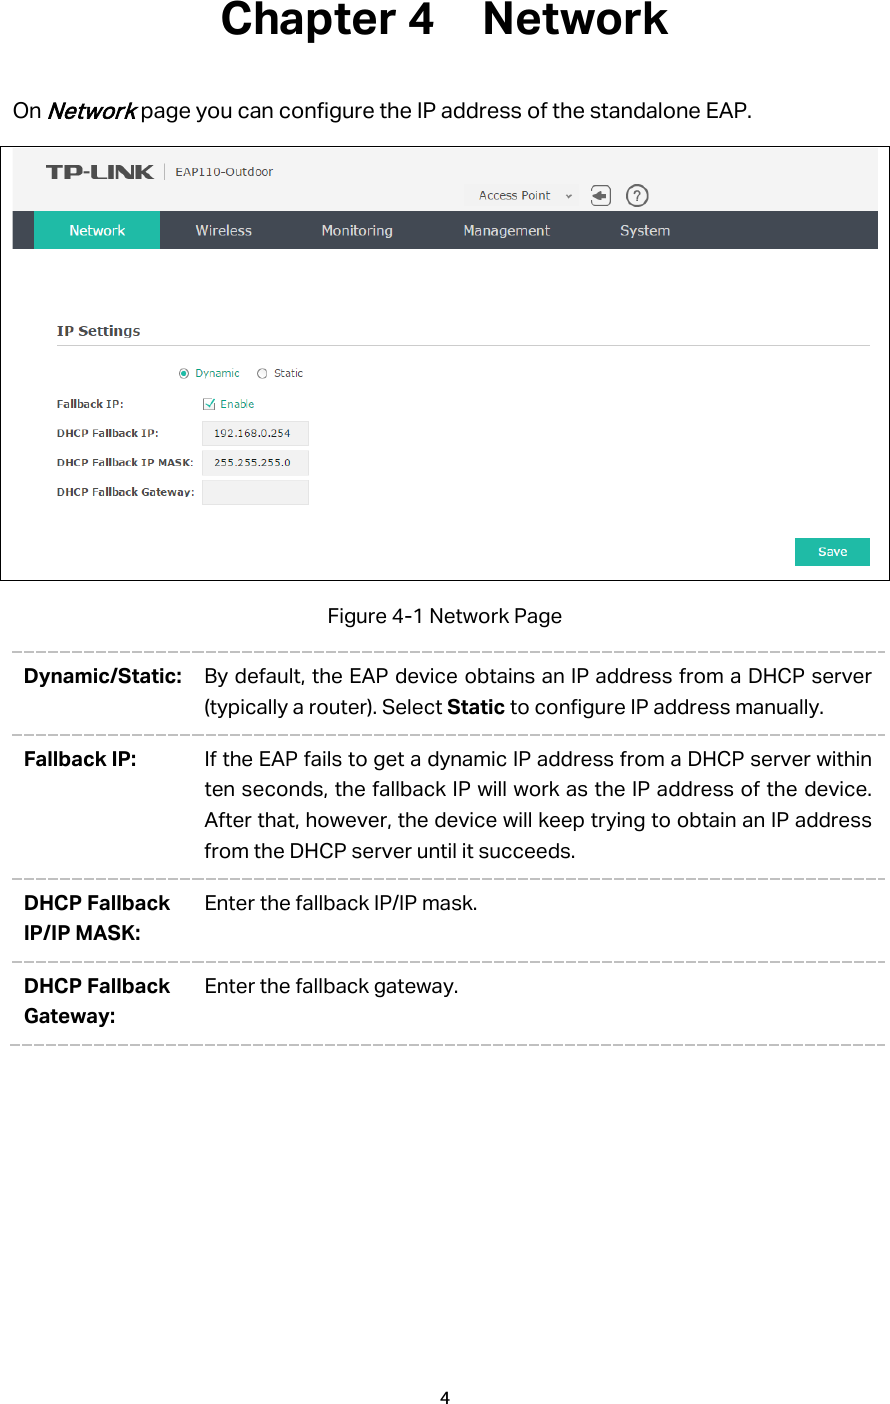 Chapter 4  Network On Network page you can configure the IP address of the standalone EAP.    Figure 4-1 Network Page Dynamic/Static: By default, the EAP device obtains an IP address from a DHCP server (typically a router). Select Static to configure IP address manually. Fallback IP: If the EAP fails to get a dynamic IP address from a DHCP server within ten seconds, the fallback IP will work as the IP address of the device. After that, however, the device will keep trying to obtain an IP address from the DHCP server until it succeeds. DHCP Fallback IP/IP MASK: Enter the fallback IP/IP mask. DHCP Fallback Gateway: Enter the fallback gateway. 4  